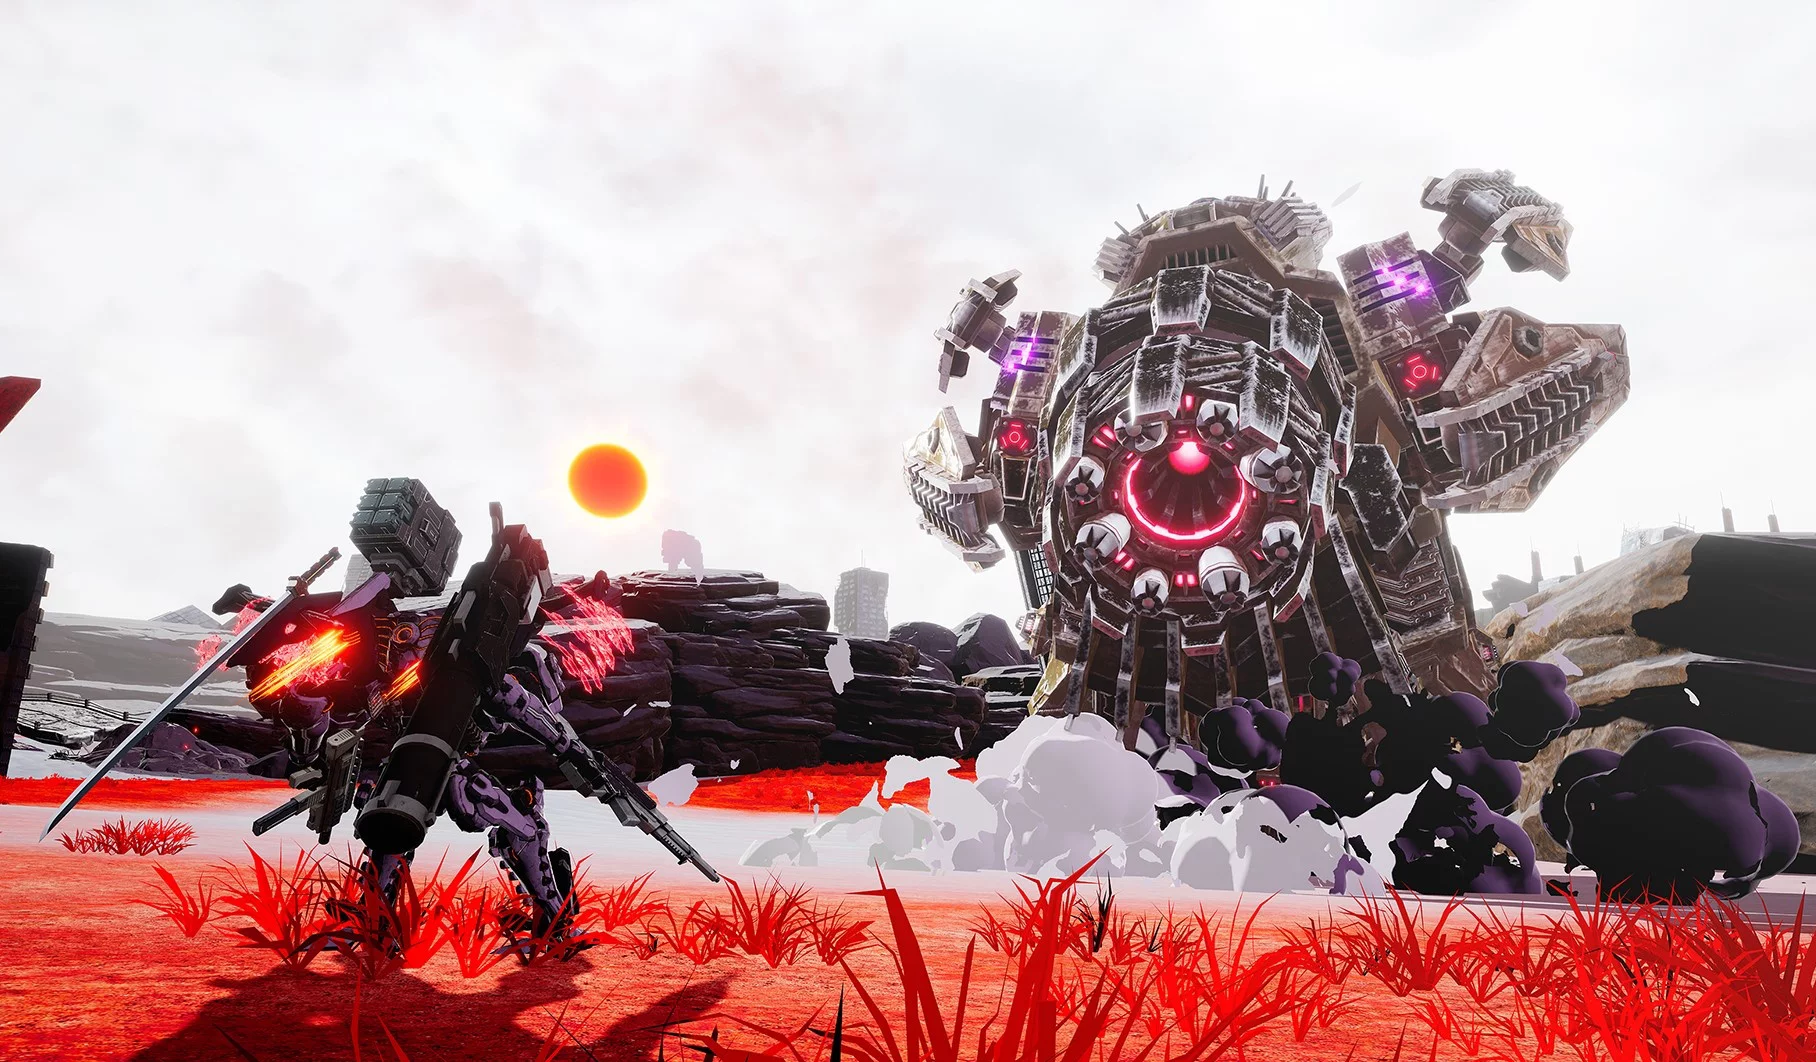 Marvelous’ mech-shooter Daemon X Machina comes to PC next week